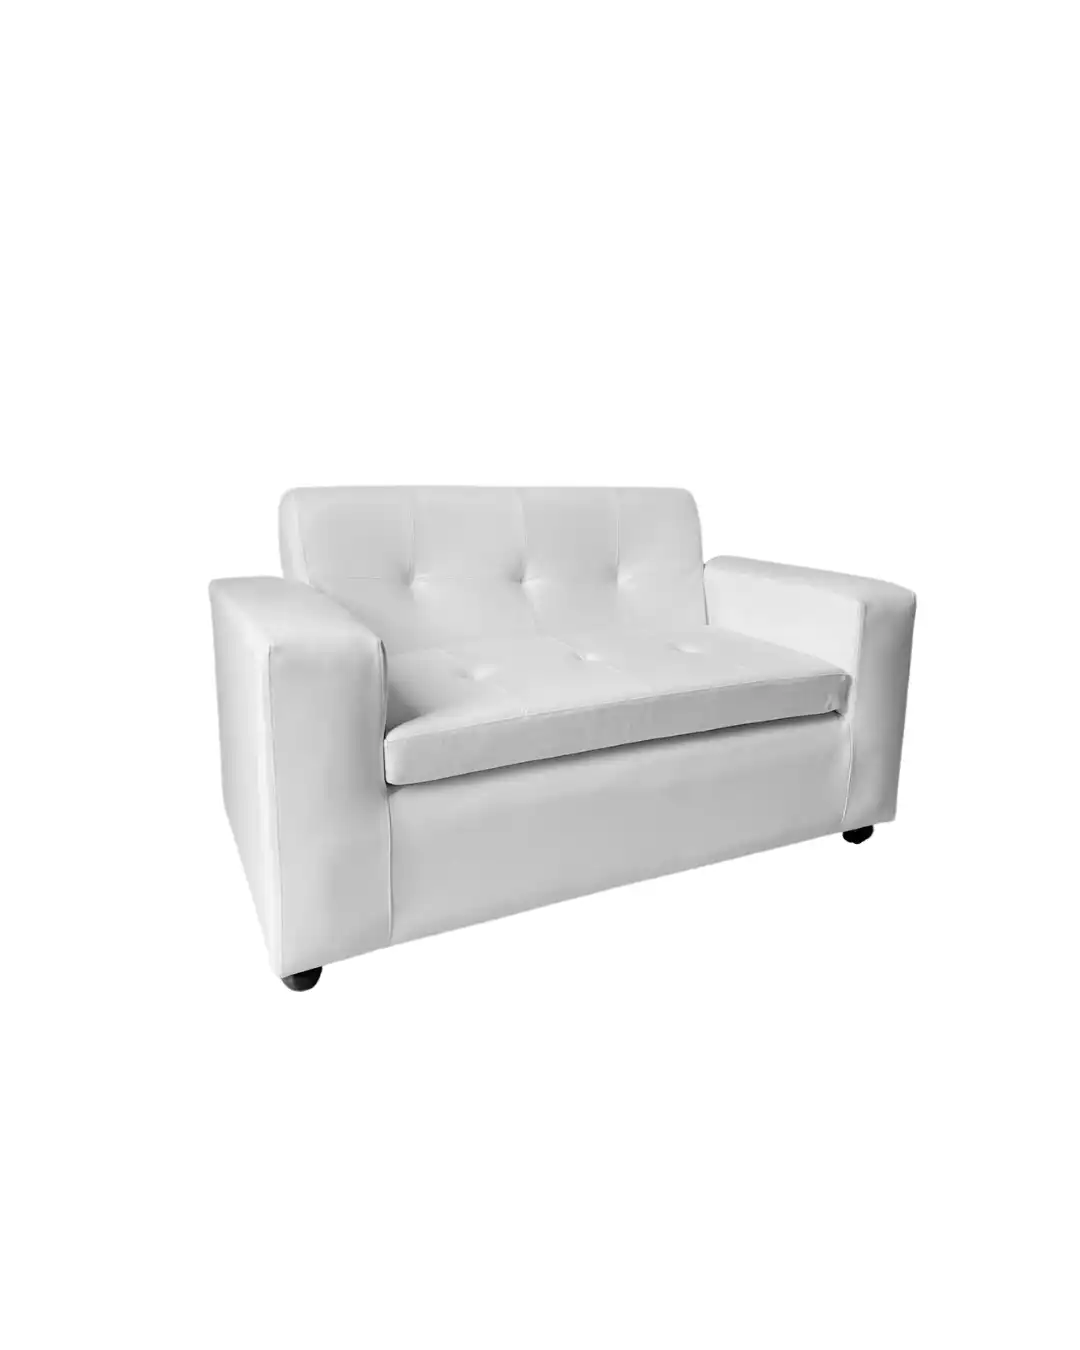 VIP Double Seater Sofa for rent